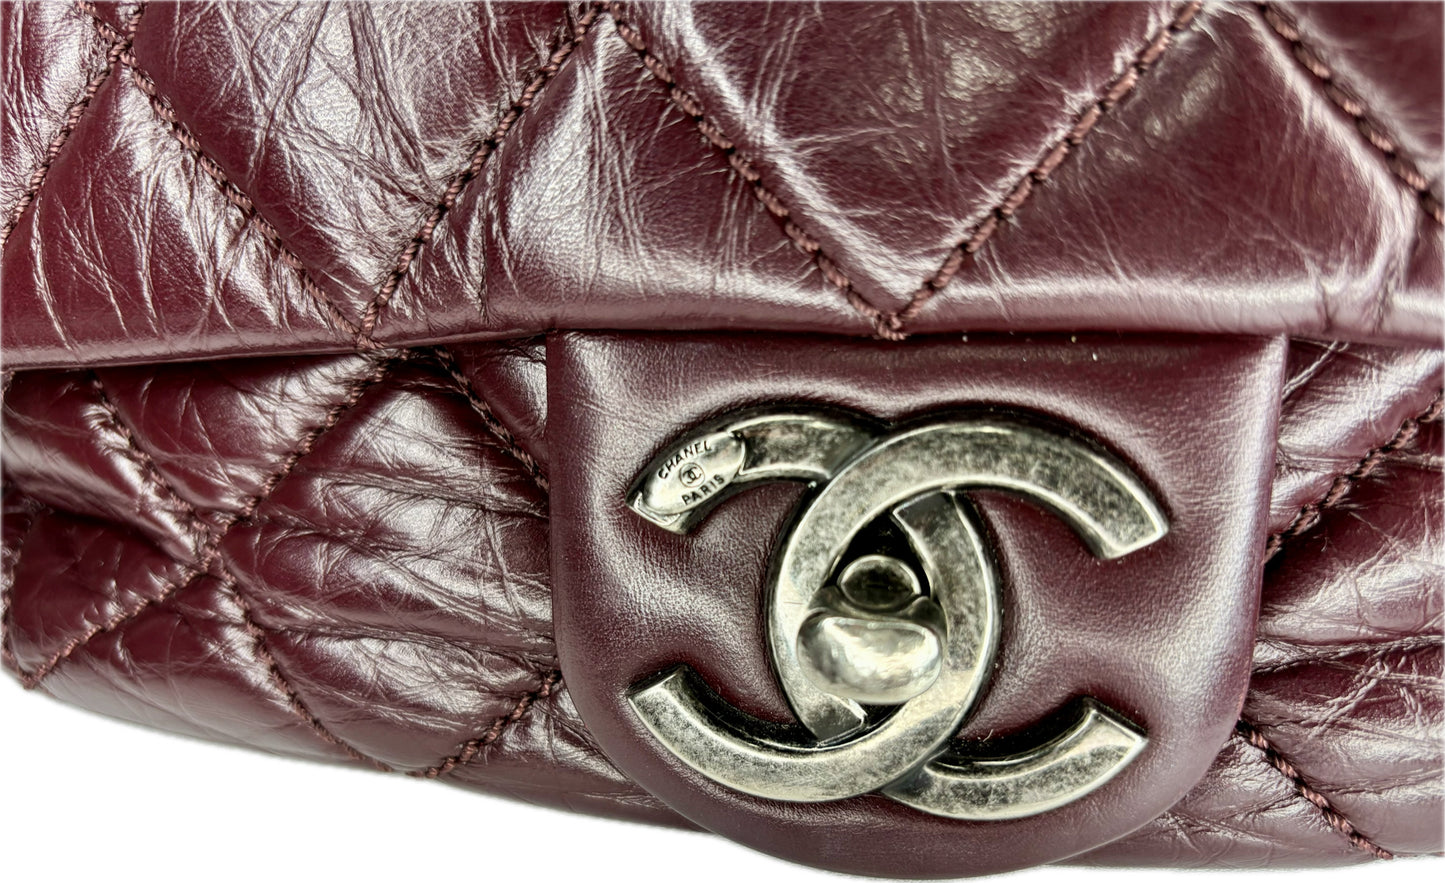 Chanel Quilted Leather Purse